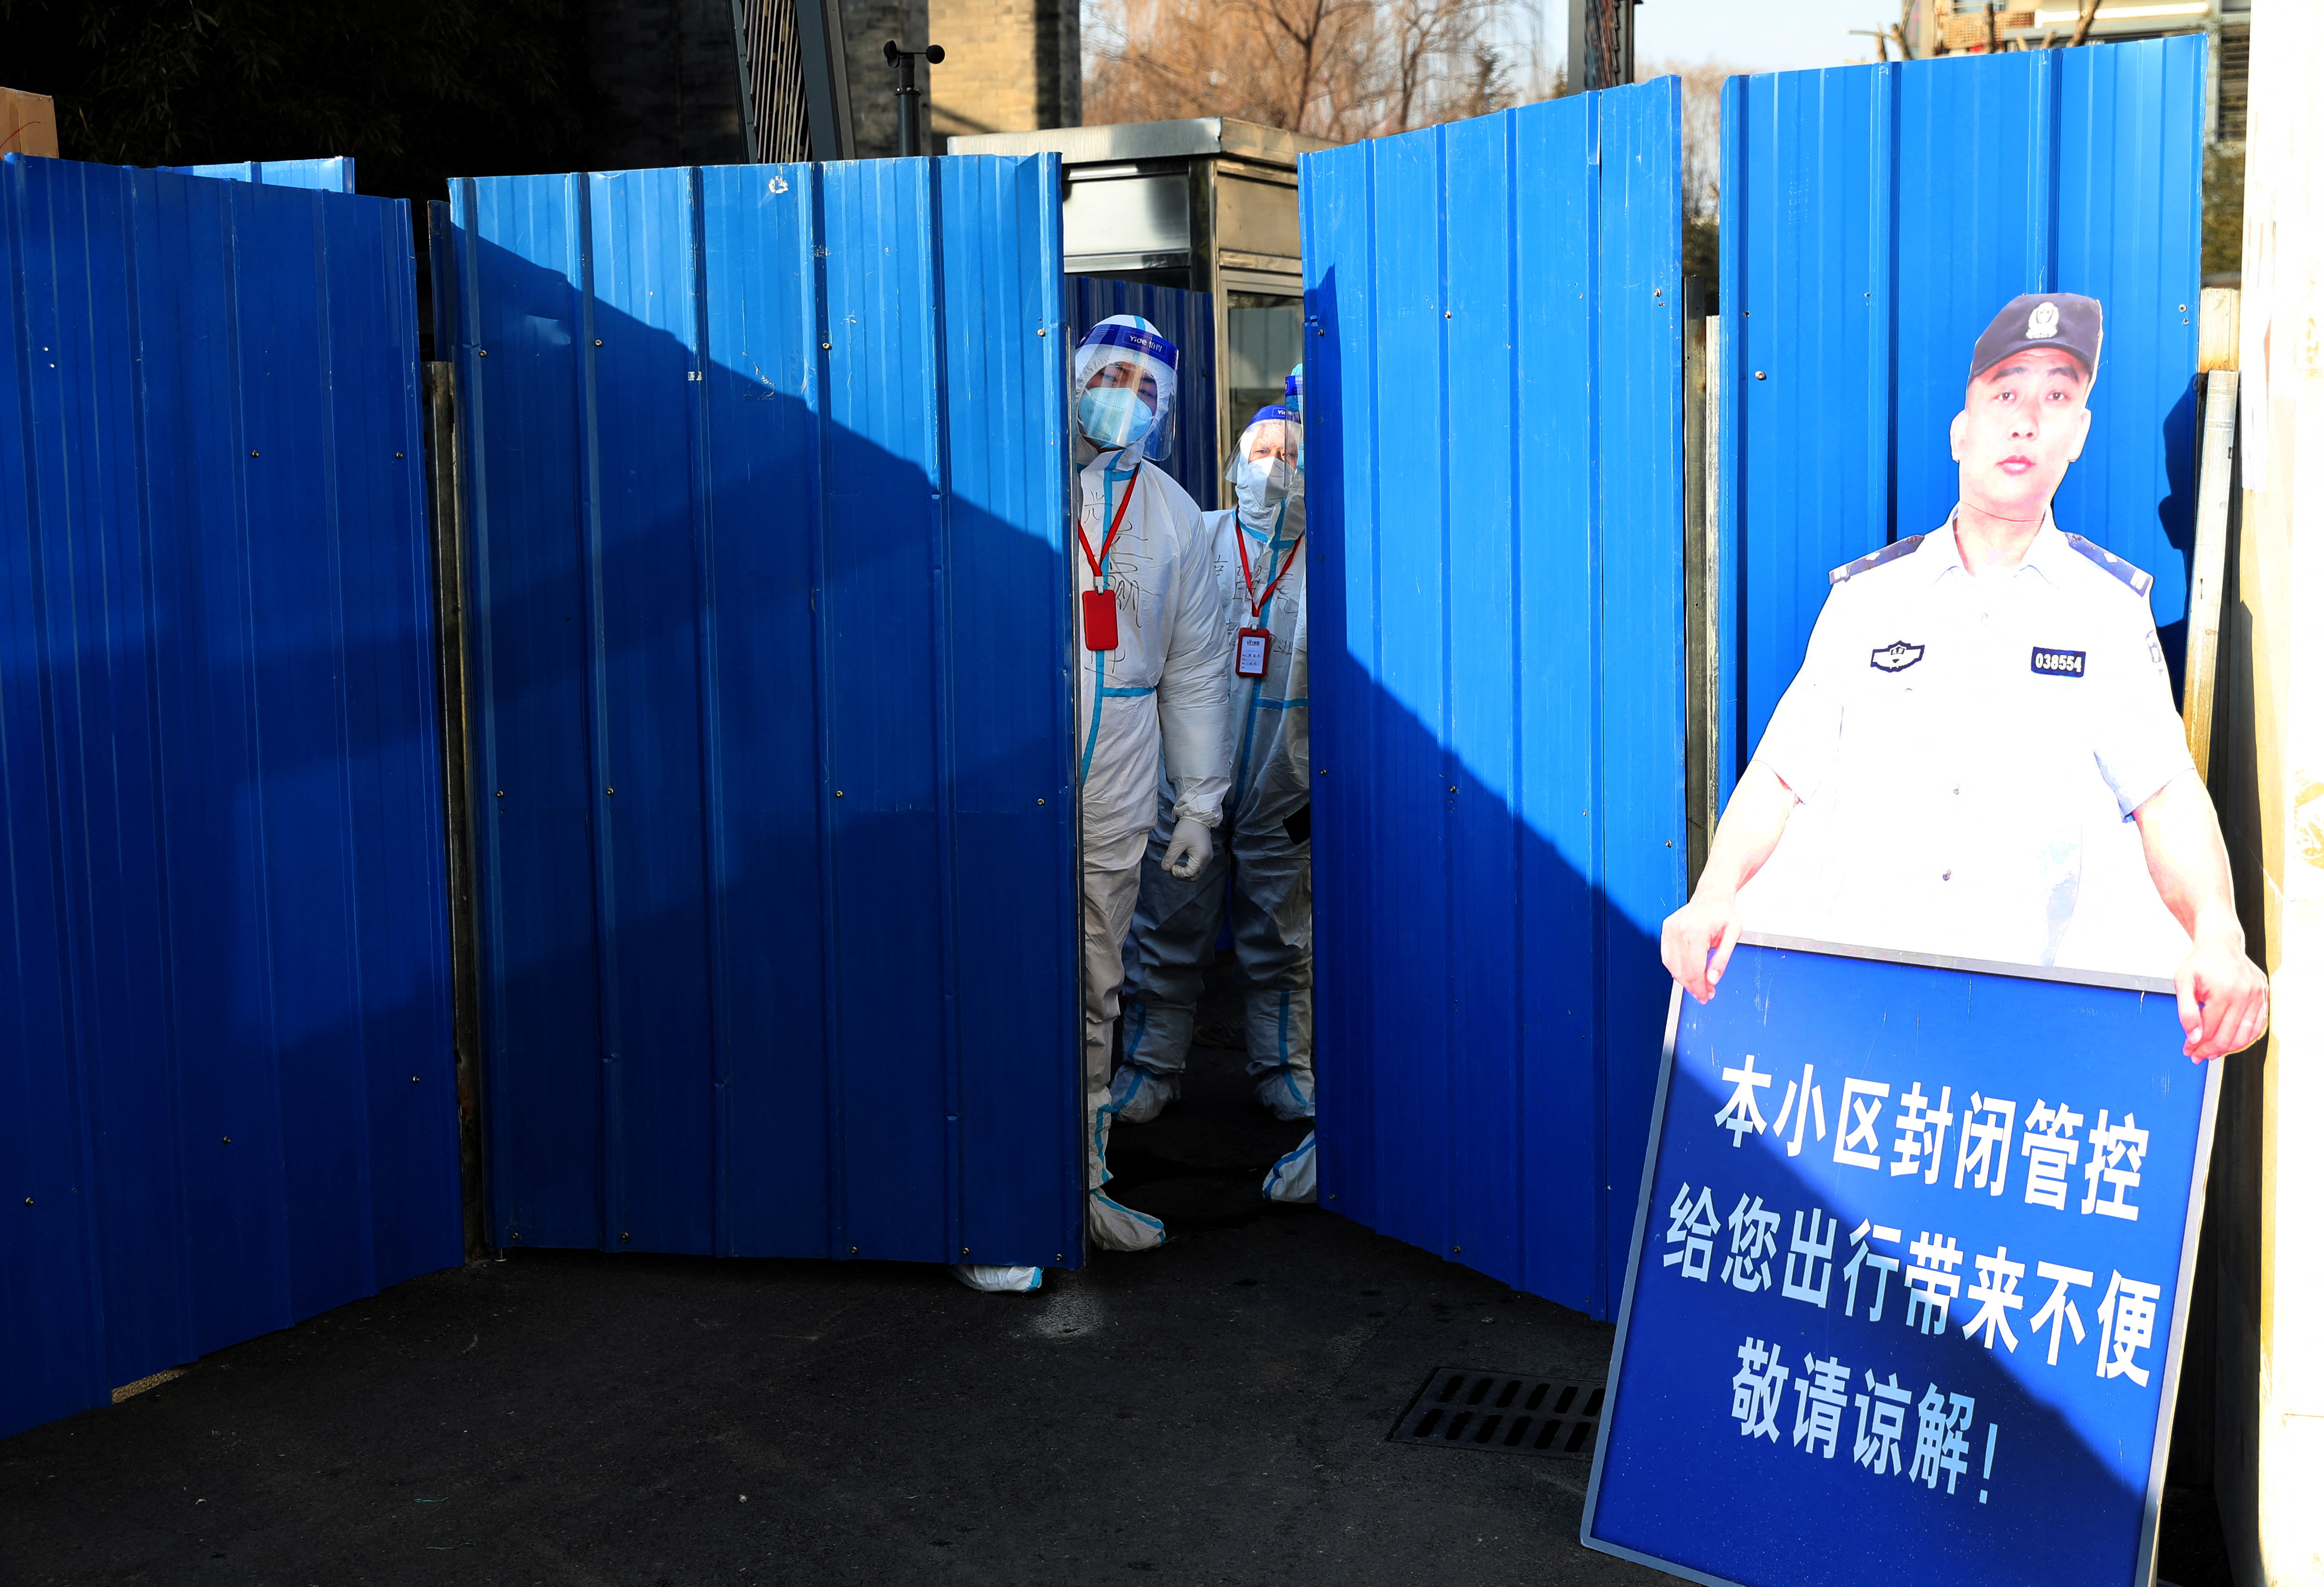 Workers wearing protective suits following the coronavirus disease (COVID-19) outbreak stand at an entrance to a residential compound under lockdown after a case of the Omicron variant was detected, in Beijing's Haidian district, China January 18, 2022. Picture taken January 18, 2022. China Daily via REUTERS  ATTENTION EDITORS - THIS IMAGE WAS PROVIDED BY A THIRD PARTY. CHINA OUT.